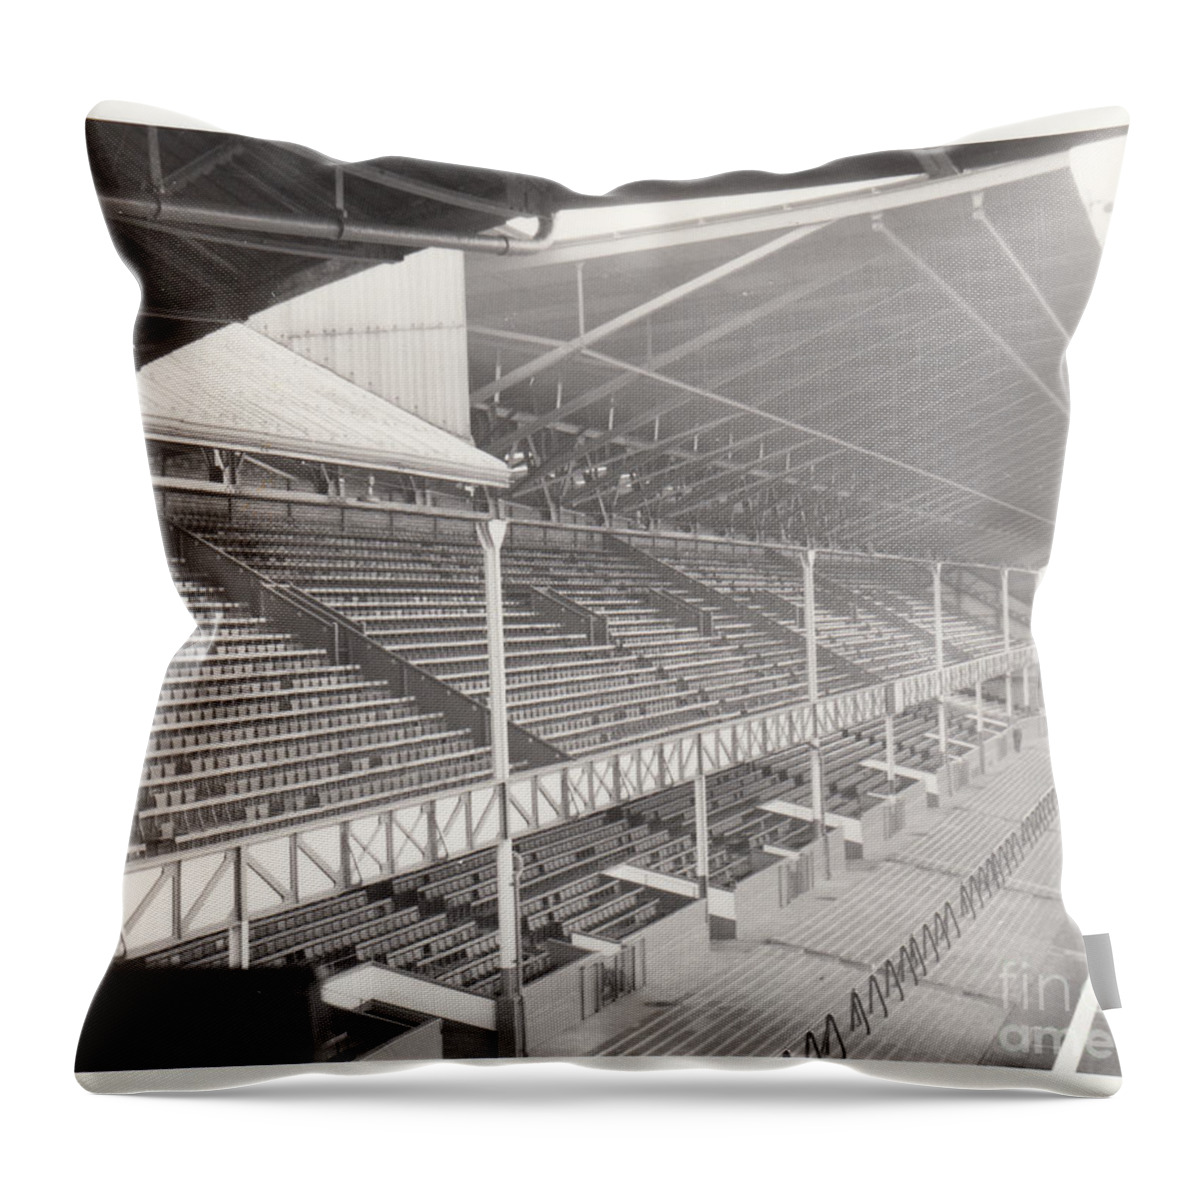 Everton Throw Pillow featuring the photograph Everton - Goodison Park - East Stand Bullens Road 1 - Leitch - August 1969 by Legendary Football Grounds